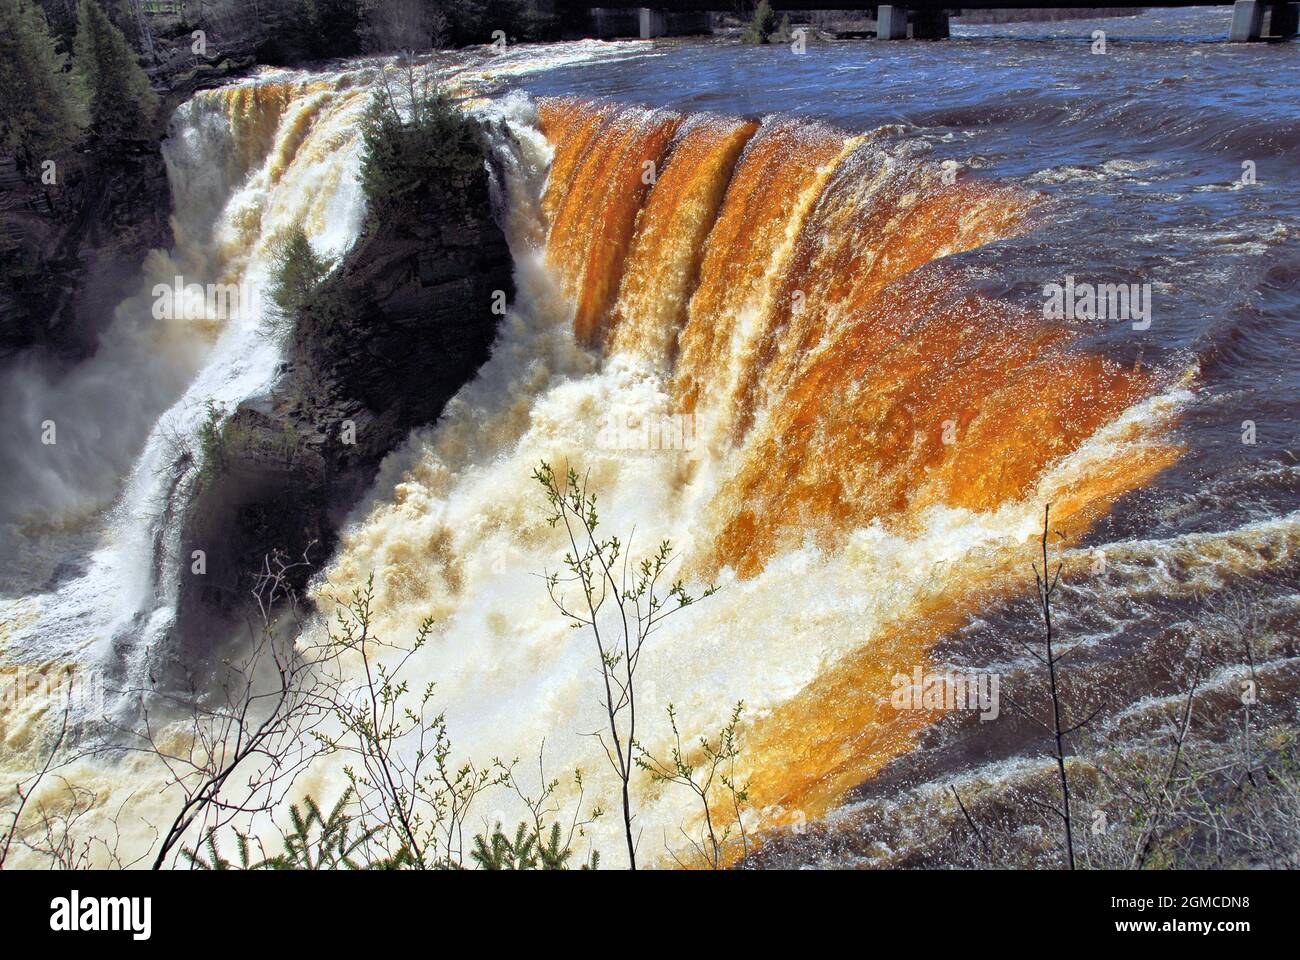 The 40 meter Kakabeka falls has a lot of water rushing over it in Oct. 2011, and is on the main highway into Thunder Bay. Stock Photo